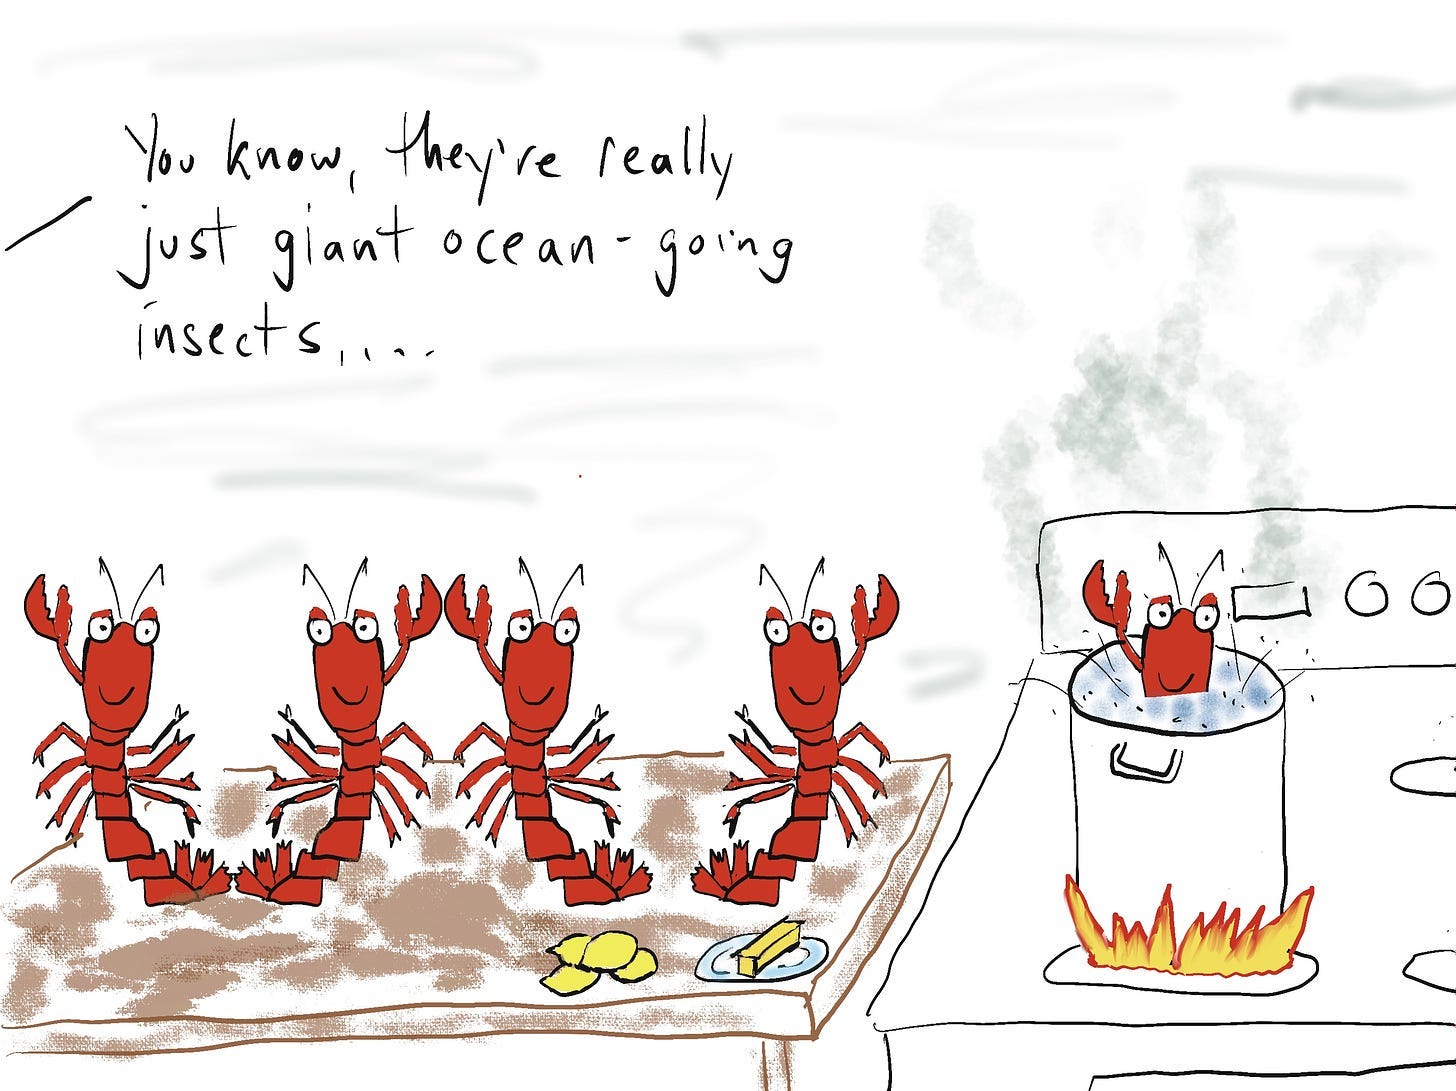 lobsters dance into a cooking pot